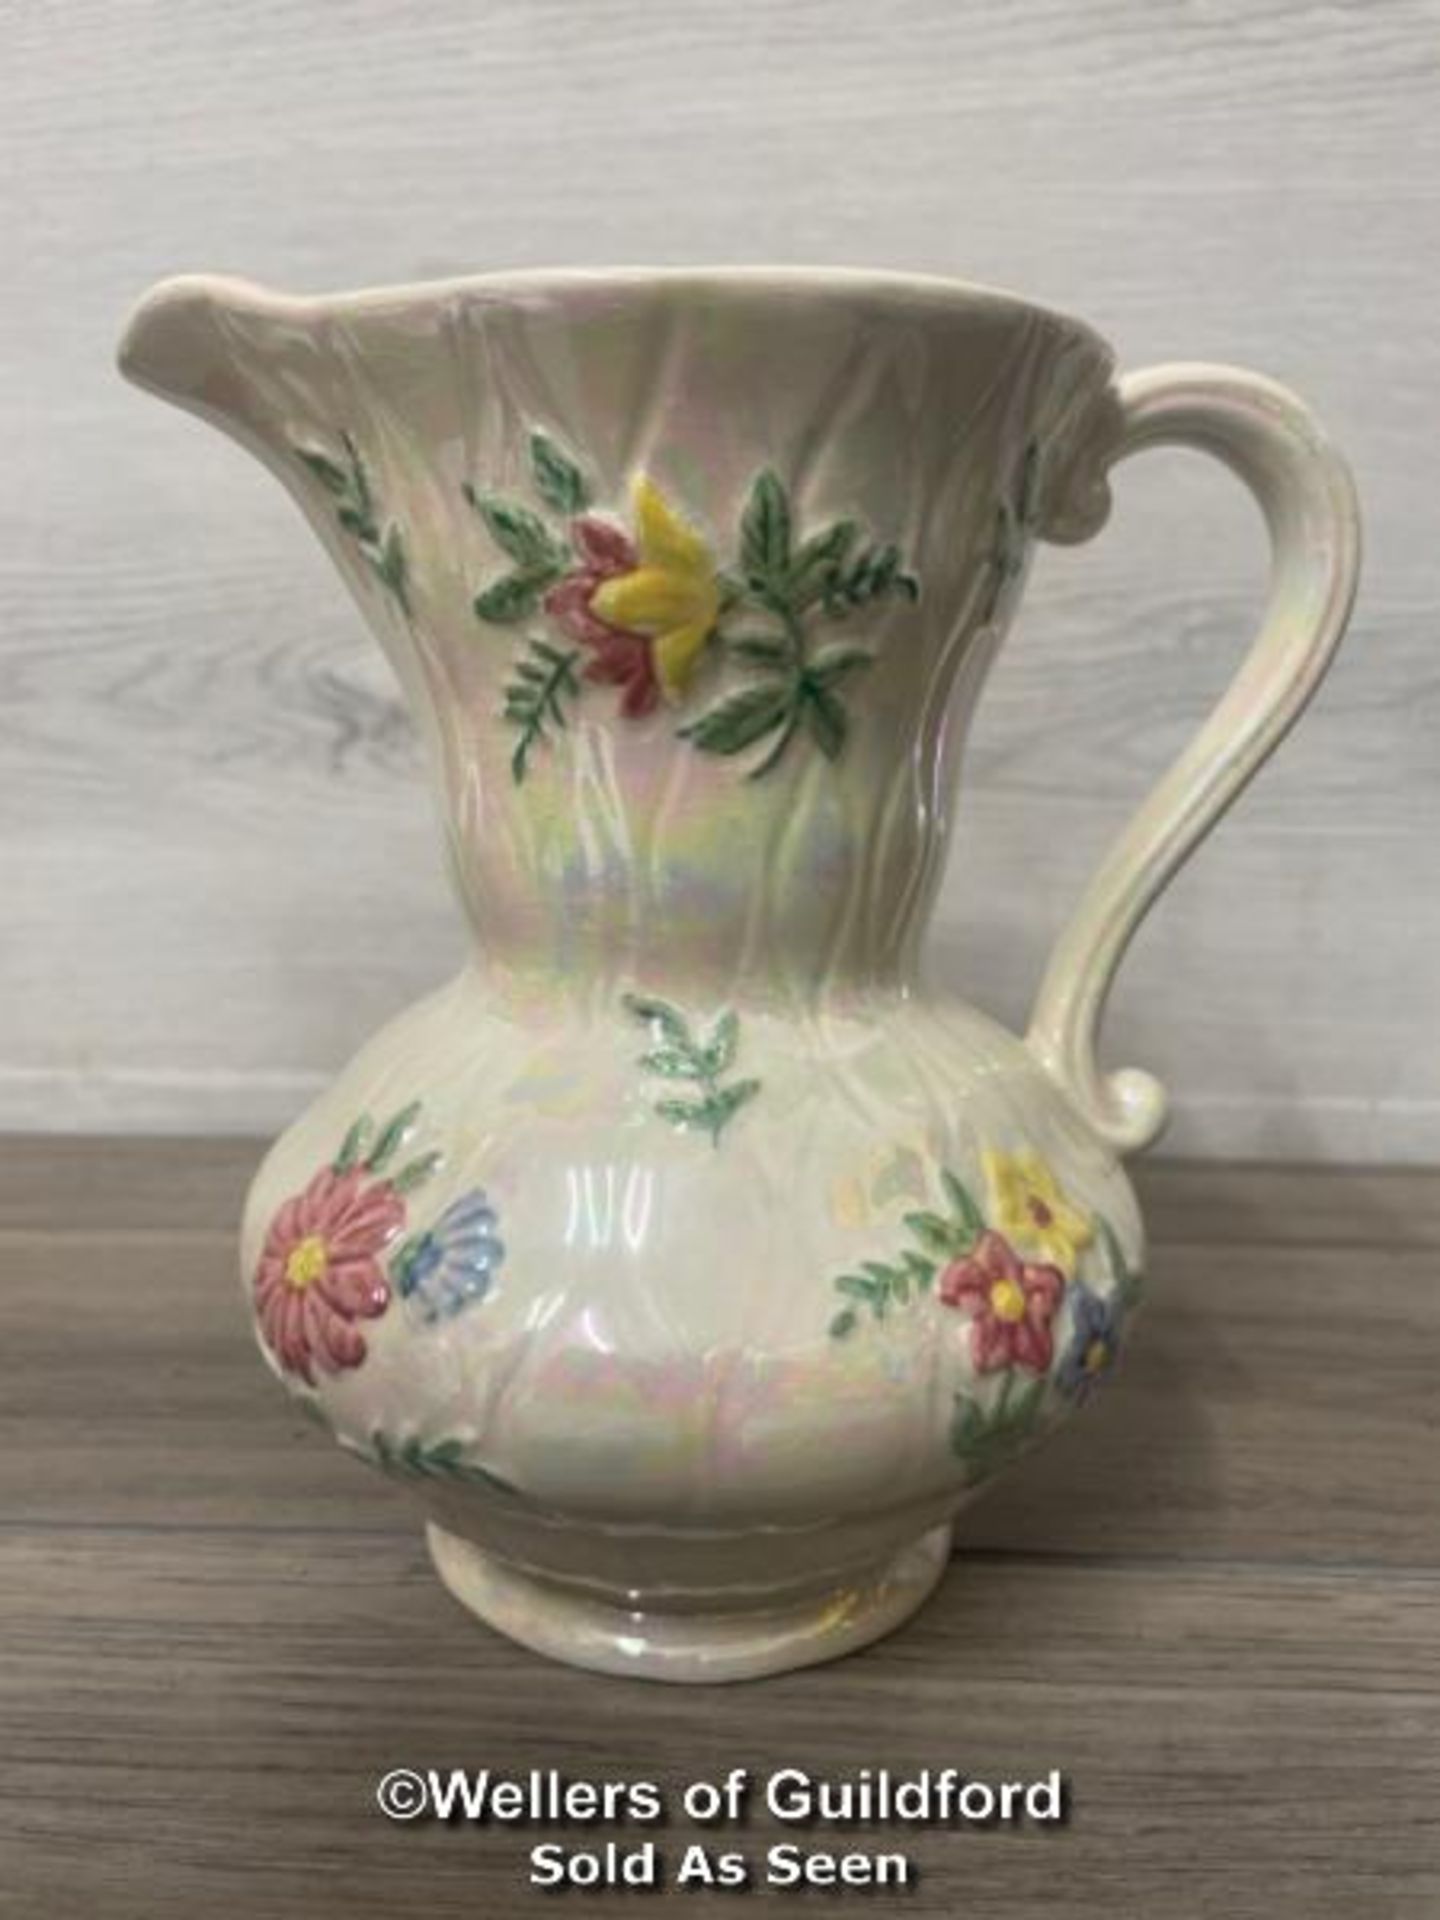 MAILING WARE LUSTRE JUG, 9" TALL IN EXCELLENT CONDITION